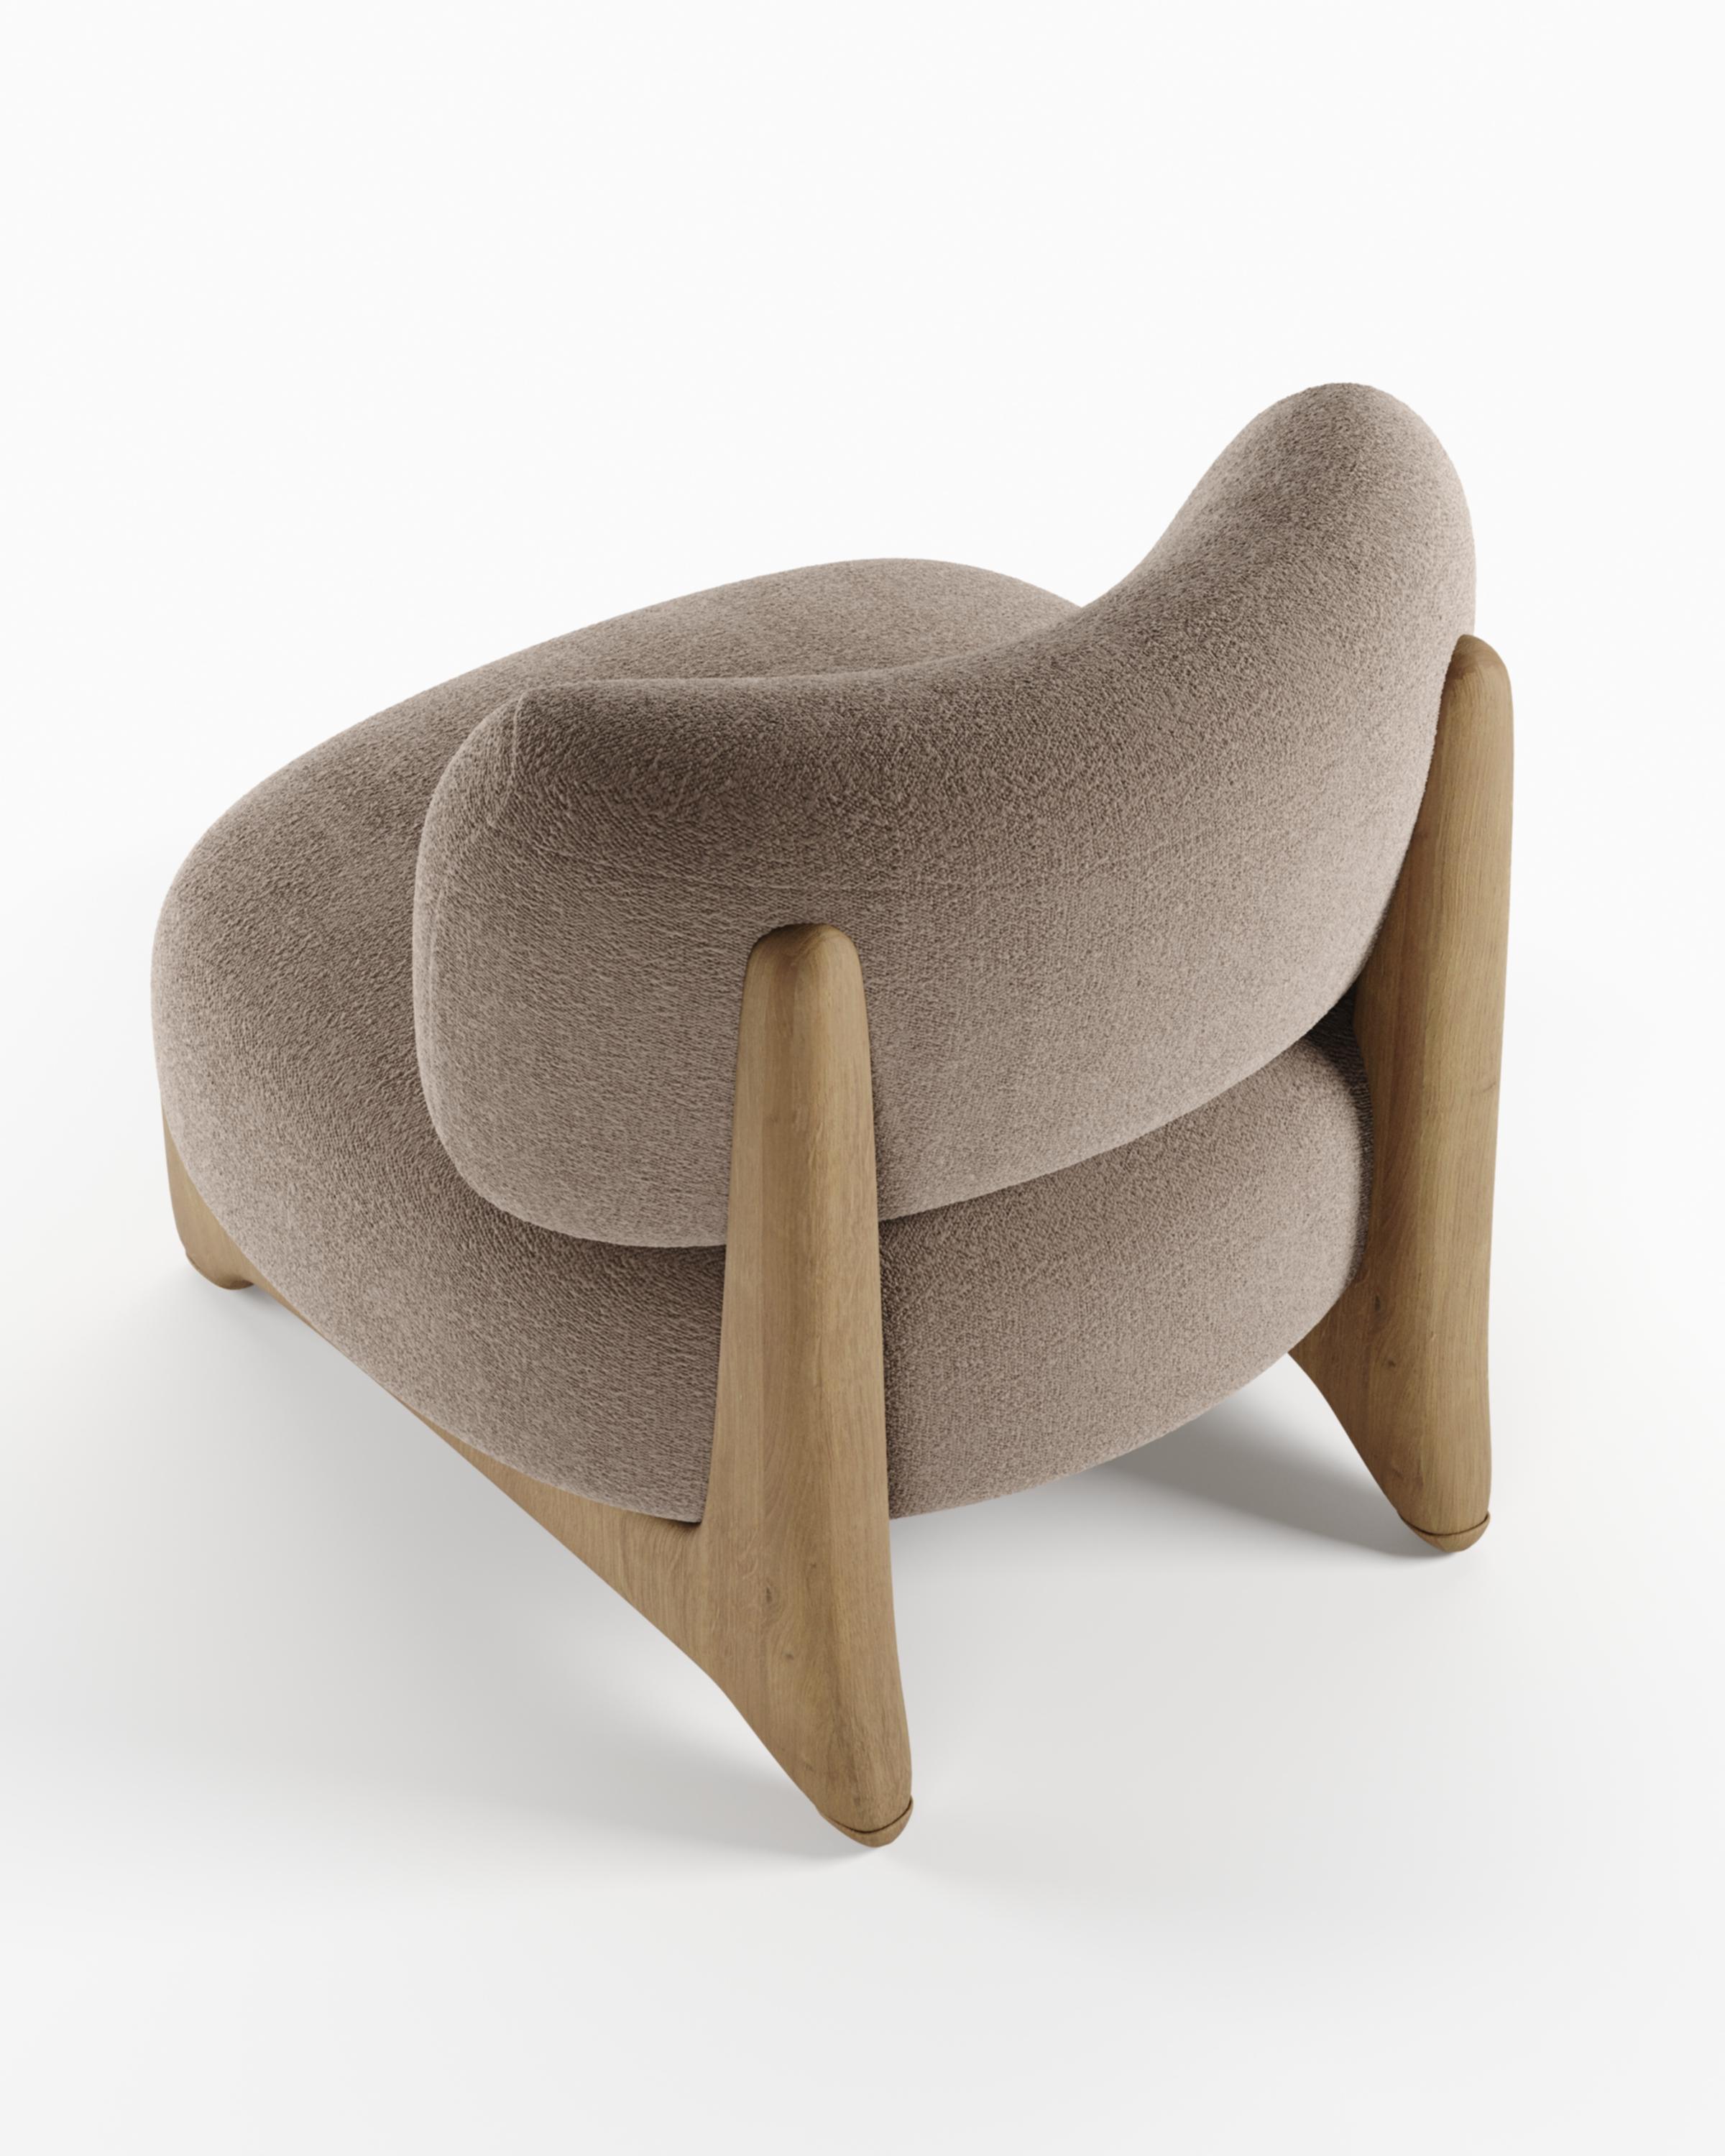 Contemporary Modern Tobo Armchair in Fabric & Oak Wood by Collector Studio In New Condition For Sale In Castelo da Maia, PT